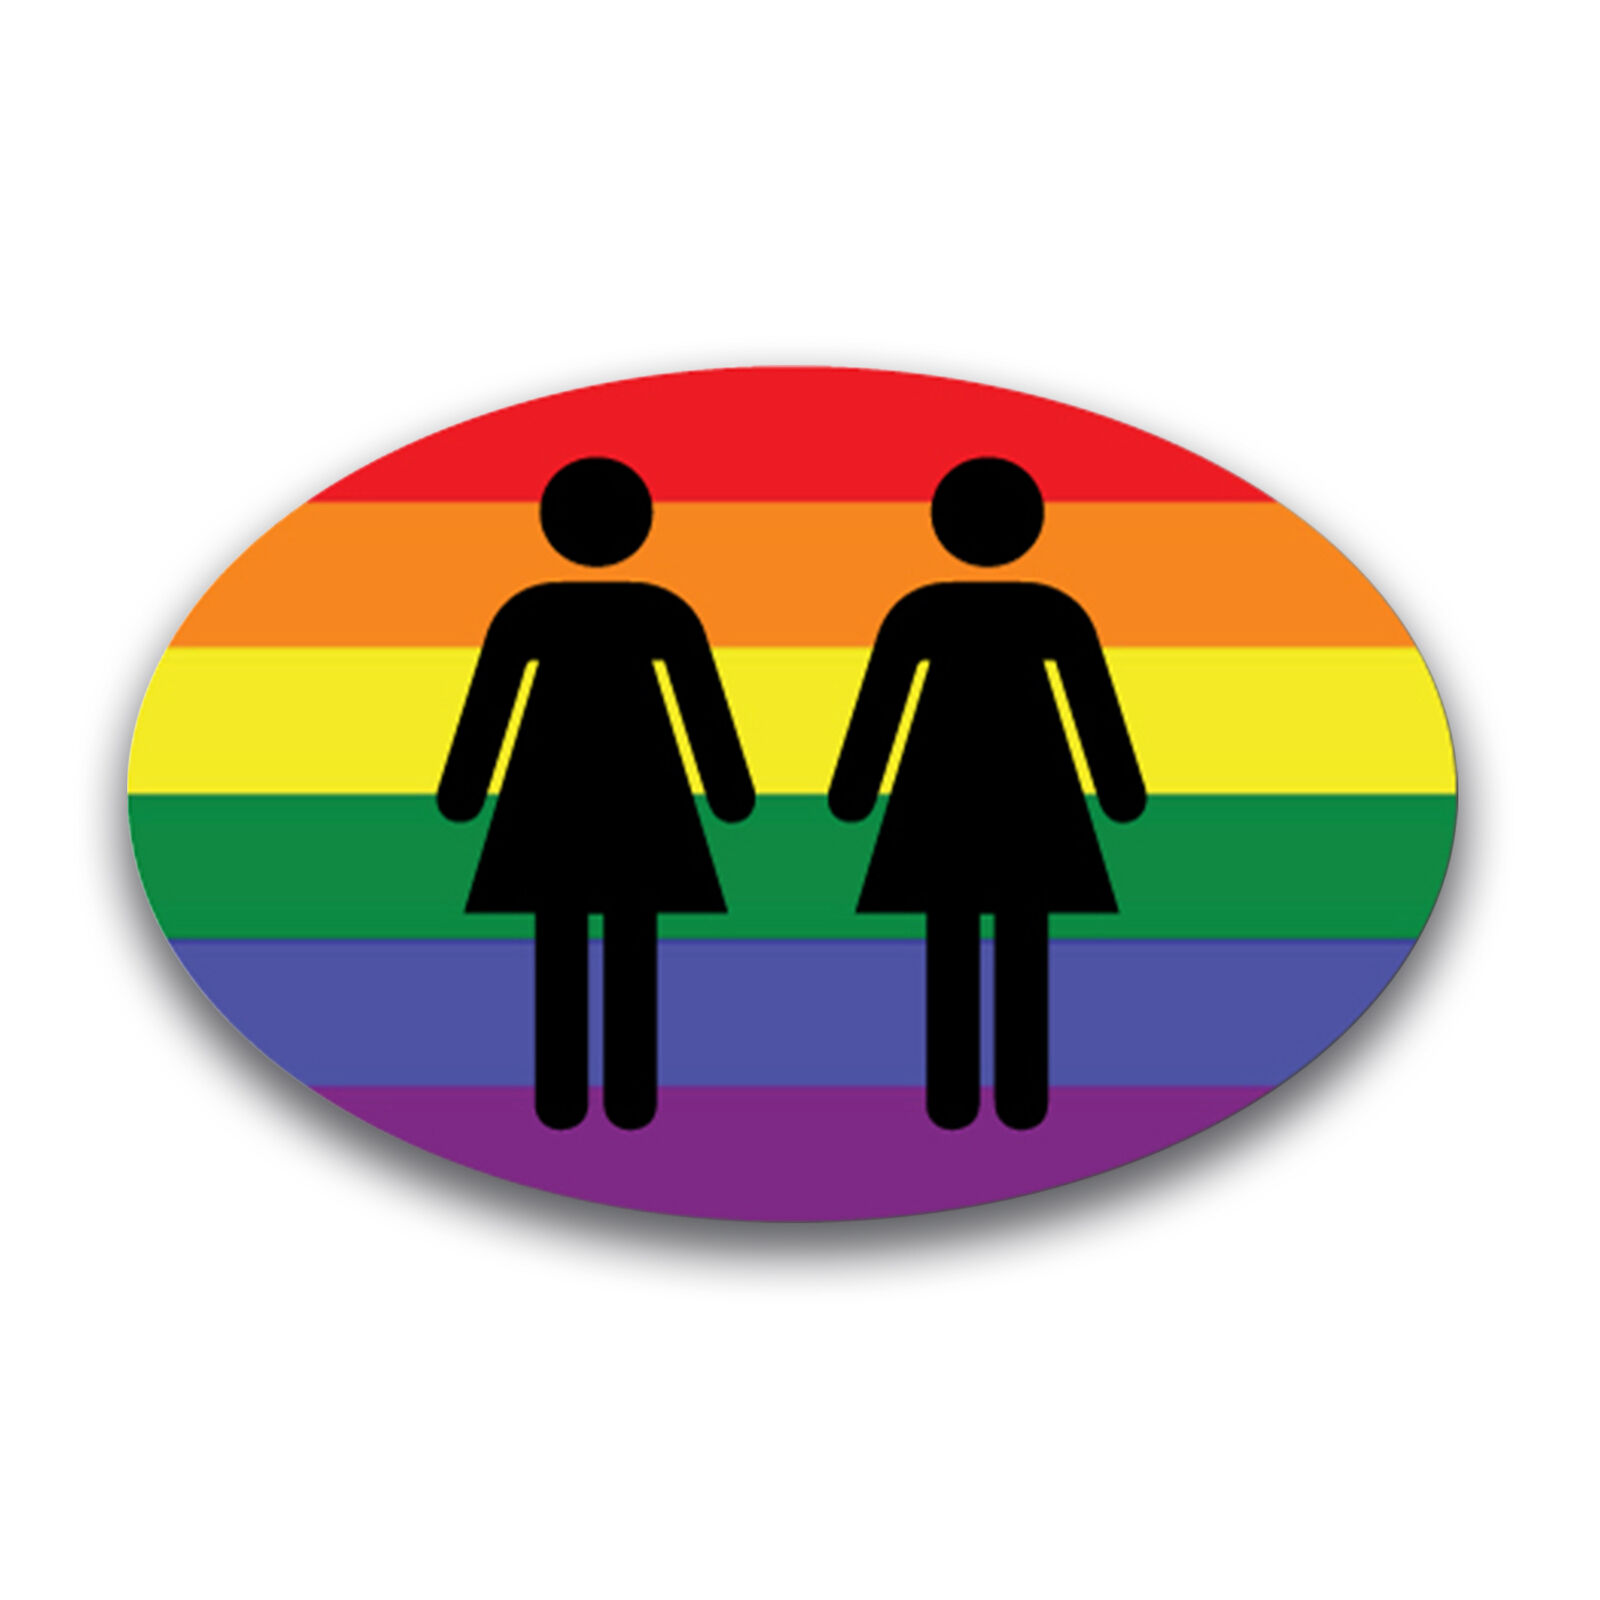 LGBT 2 Females Oval Magnet Decal, 4x6 Inches, Heavy Duty Automotive Magnet